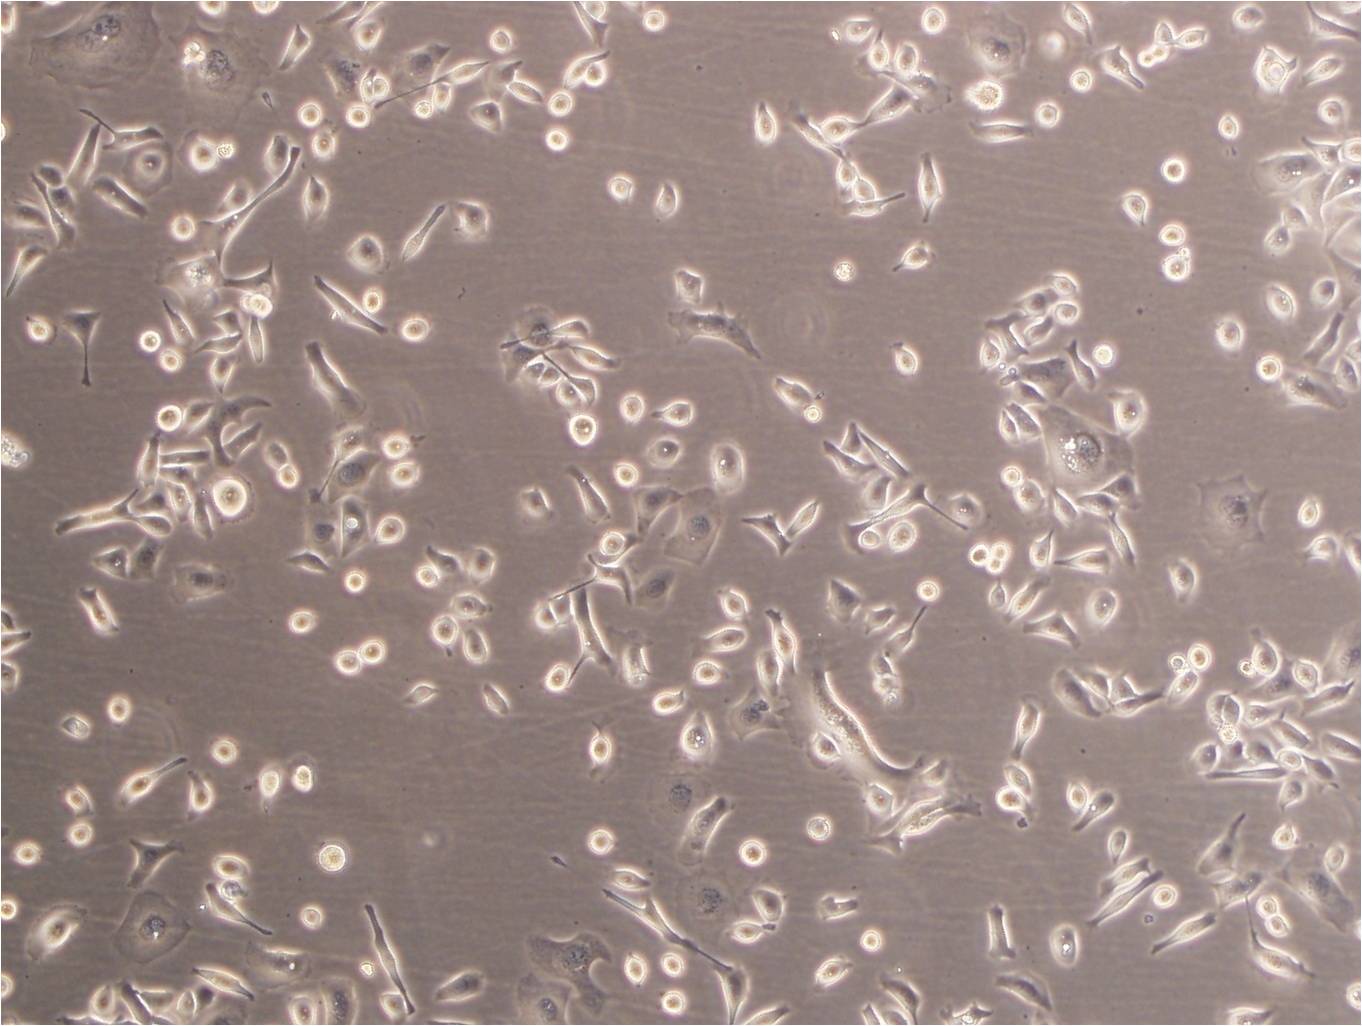 SK-CO-1 epithelioid cells人结直肠腺癌细胞系,SK-CO-1 epithelioid cells